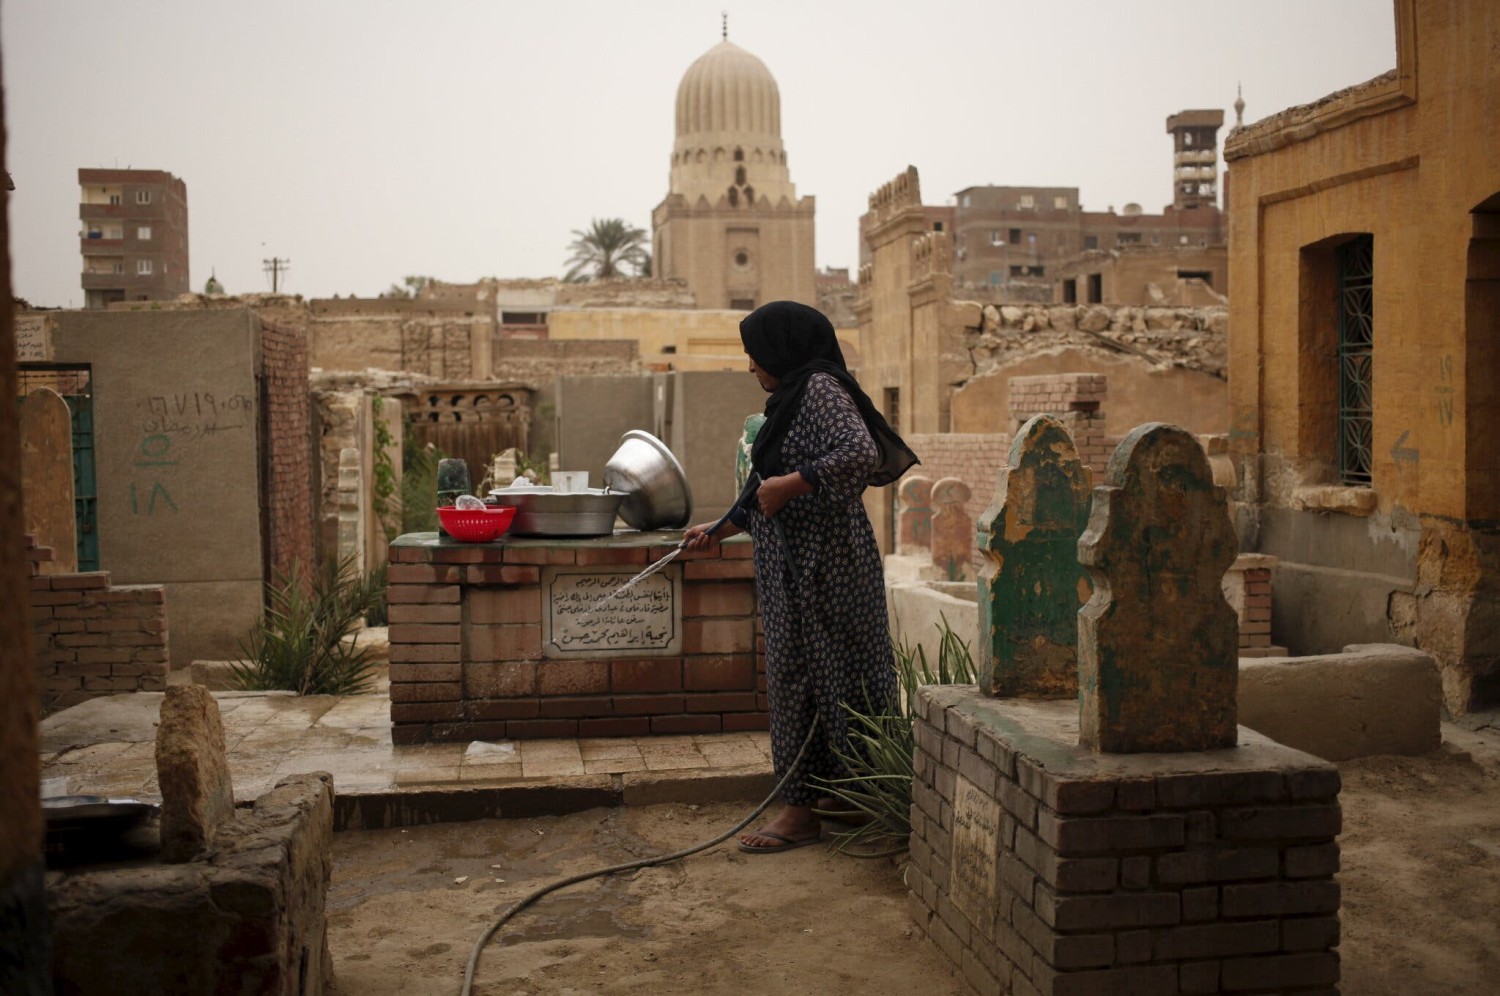 A woman cleans tombs in Cairo’s City of the Dead cemetery.Credit...Asmaa Waguih/Reuters